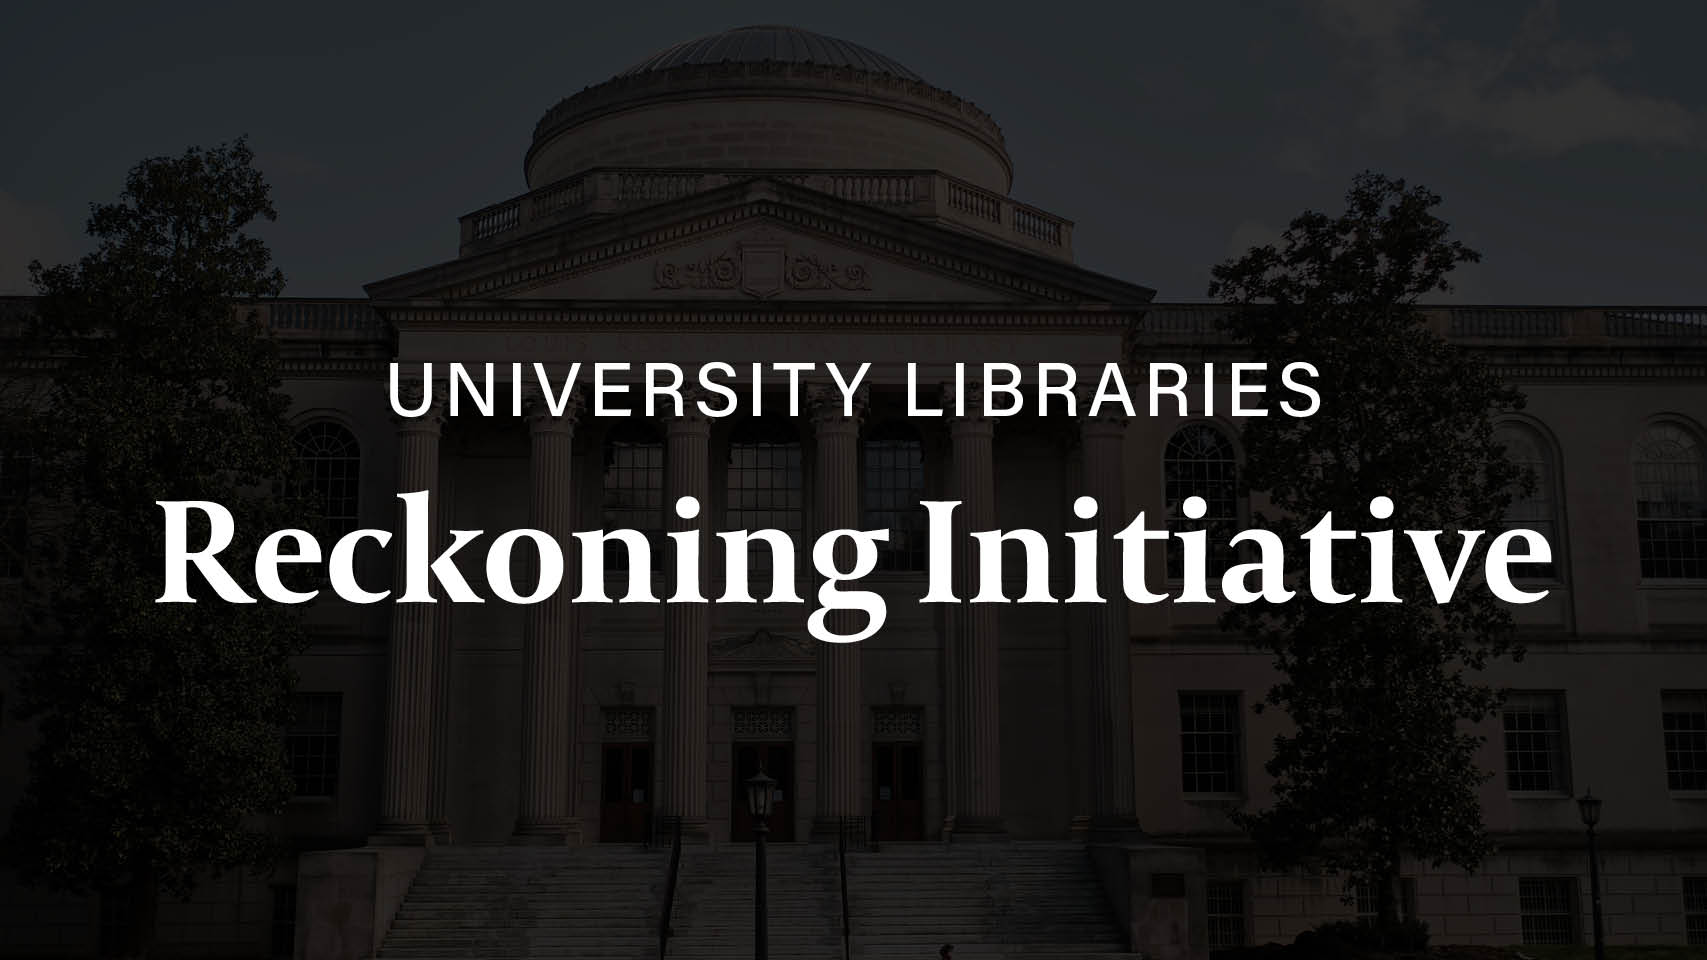 Library launches Reckoning Initiative to advance equity, inclusion and antiracism